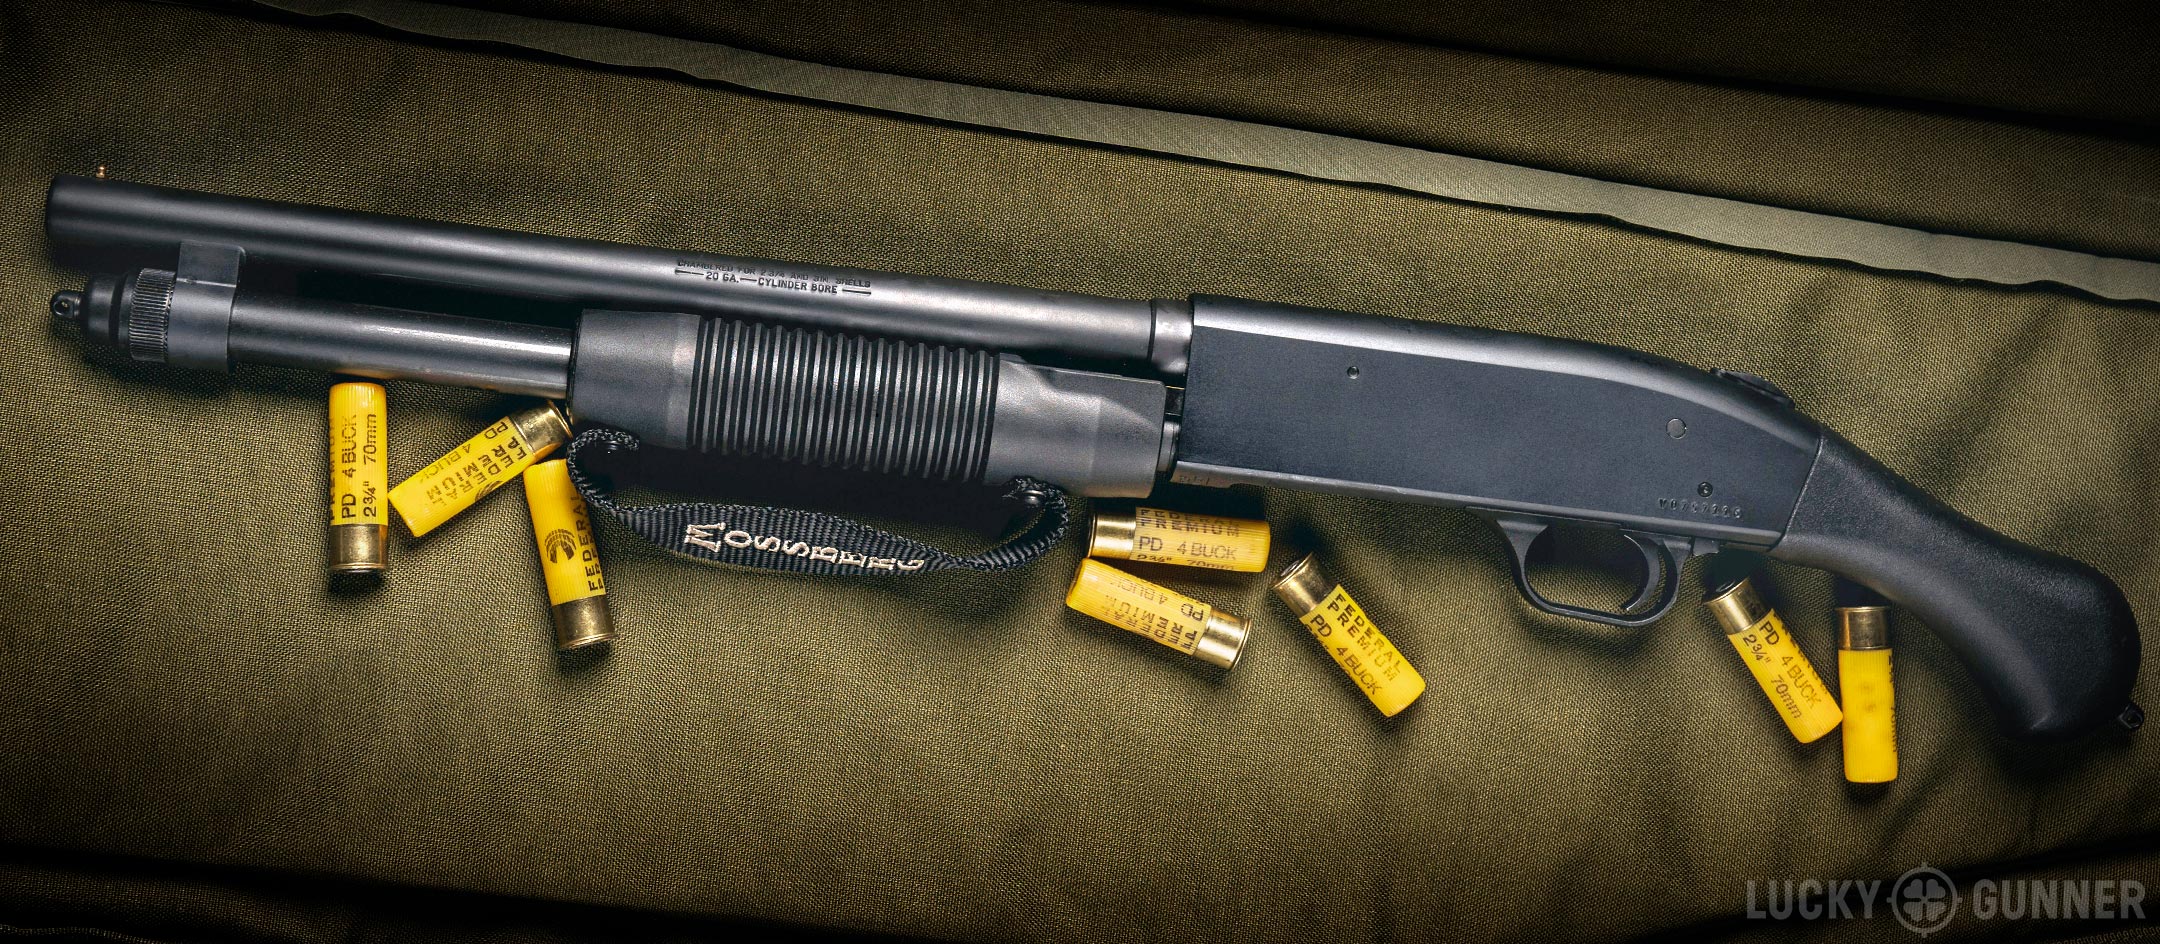 The Mossberg Shockwave is Mostly Useless - Lucky Gunner Lounge